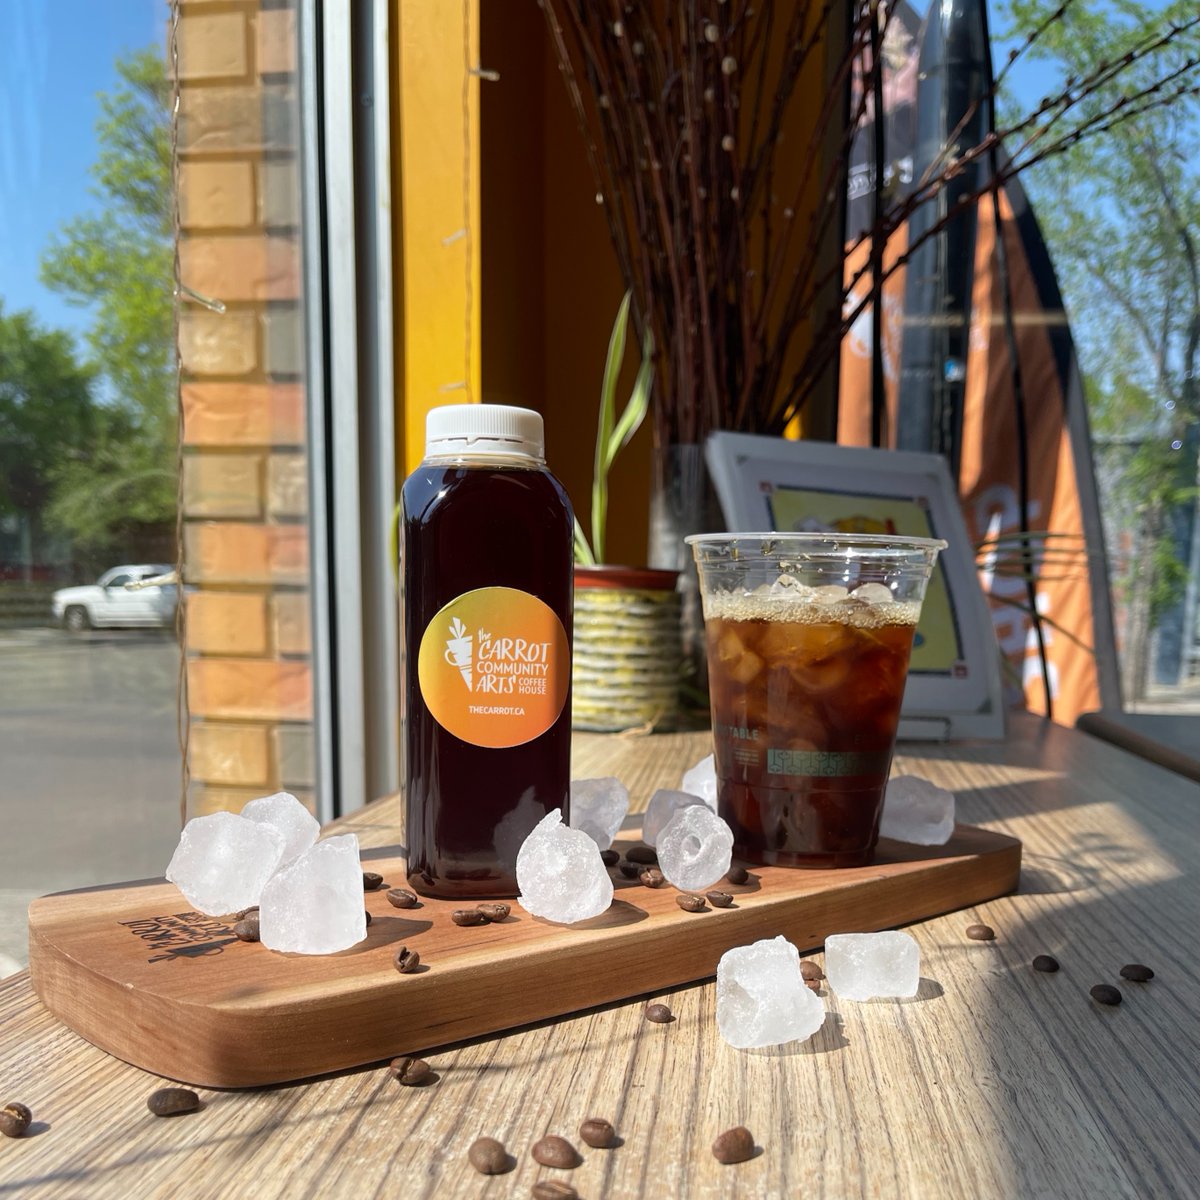 Need a refreshing pick-me-up to start your week after the long weekend? The Carrot cold brew is expertly crafted to deliver an irresistibly smooth and bold flavour to give you an energy boost! #yegcoffee #yegcafe #yeg